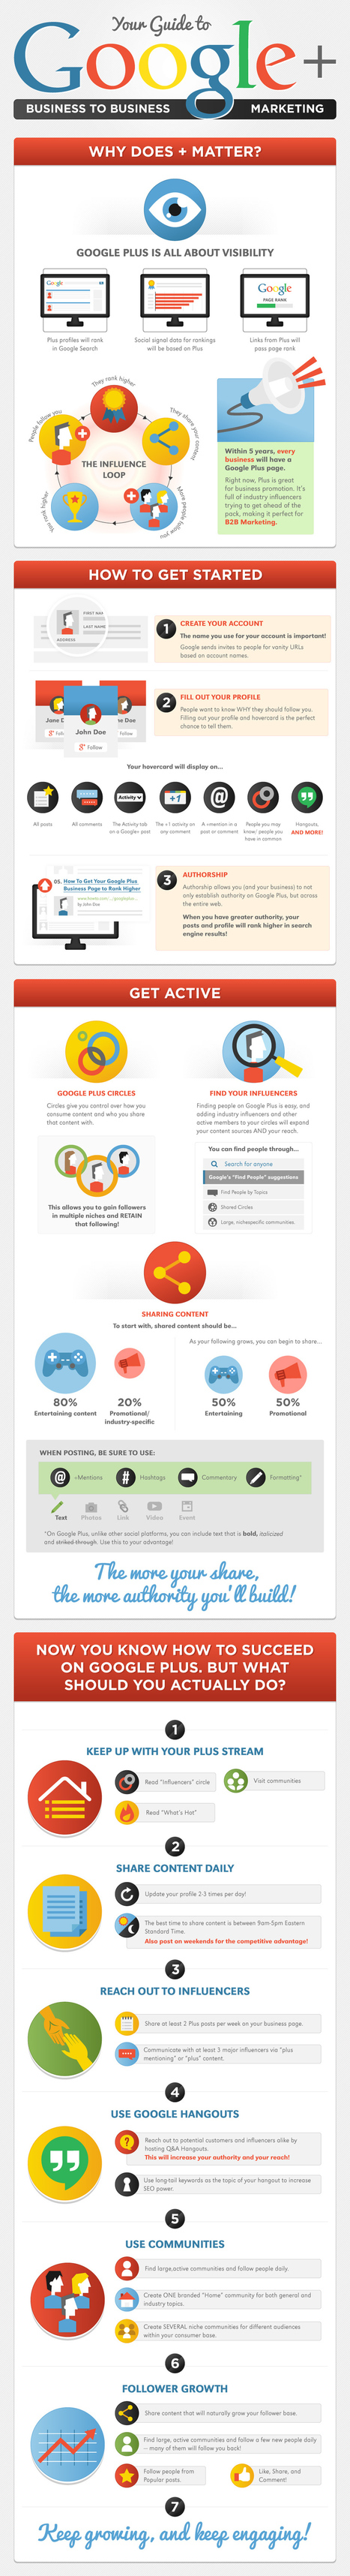 The Complete Guide to Google+ for B2B Marketing [Infographic] | World's Best Infographics | Scoop.it